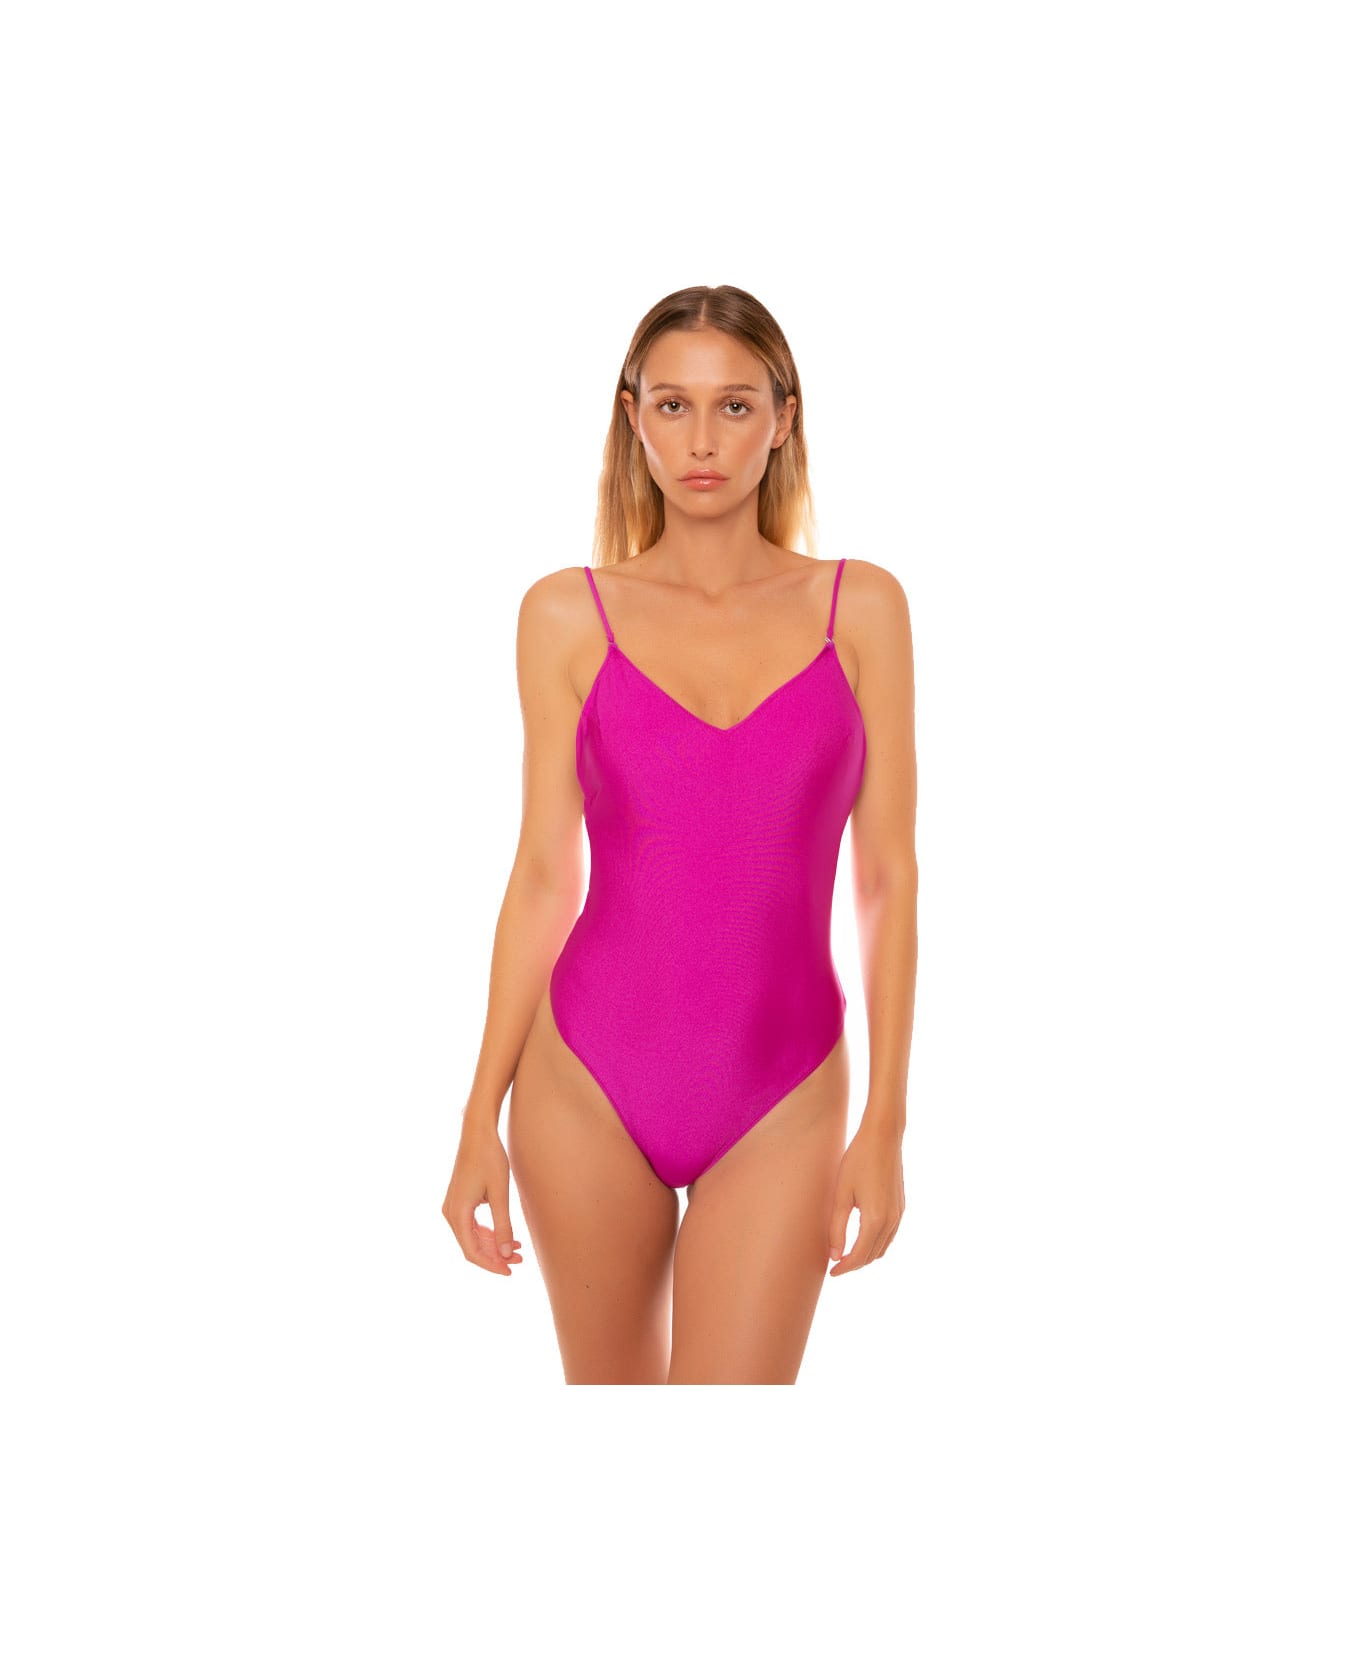 MC2 Saint Barth Fuchsia One Piece (shoulder Straps Sold Separately) | Aperikini Collection - PINK